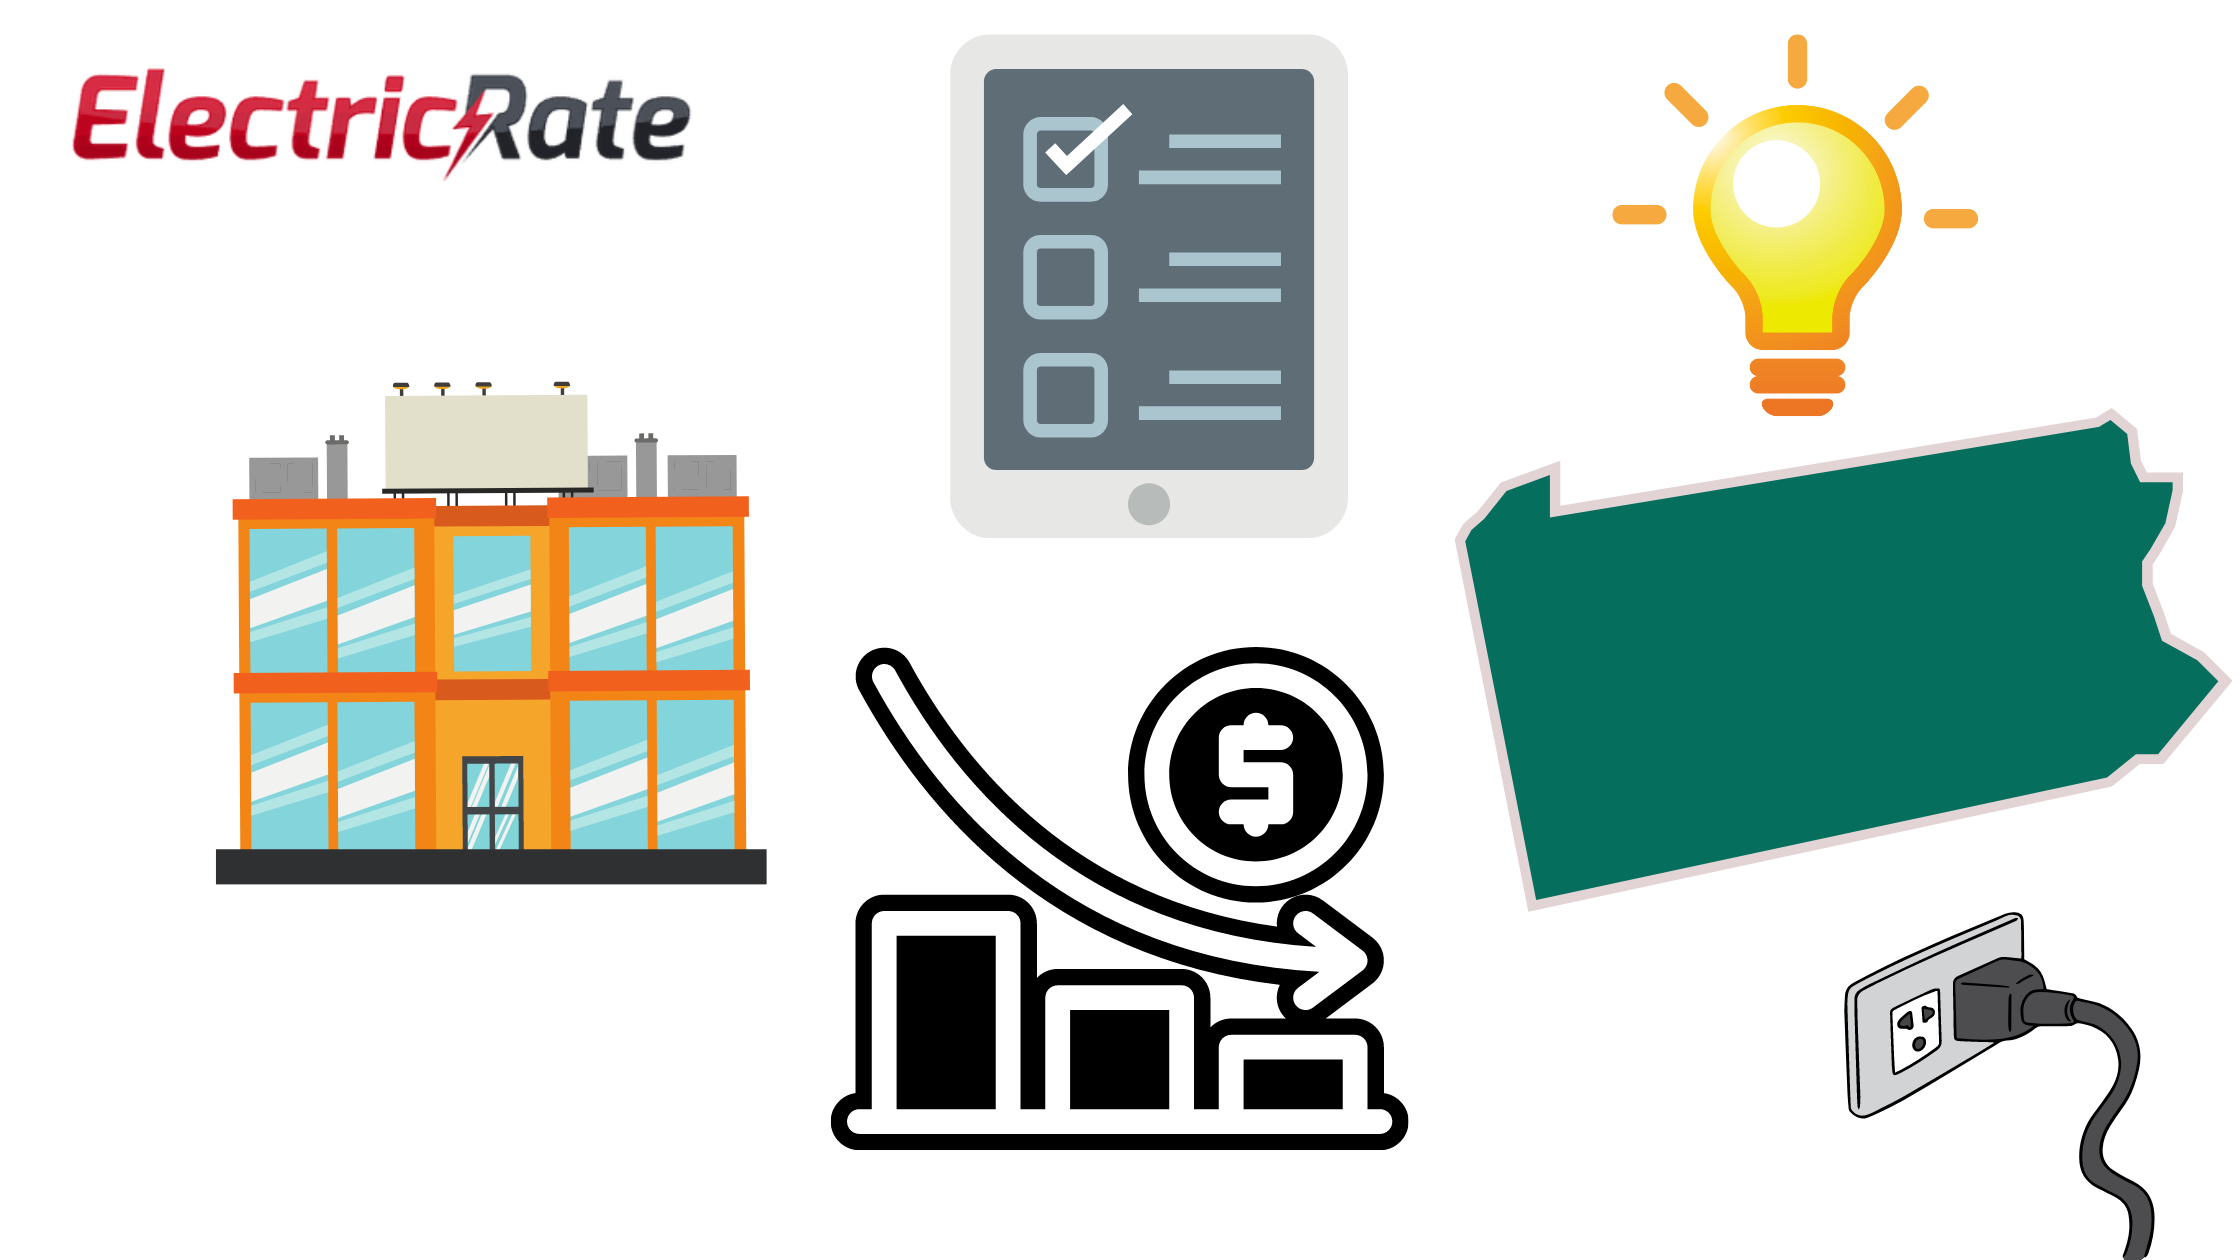 Vector images of a Pennsylvania business entering into a competitive electricity rate agreement